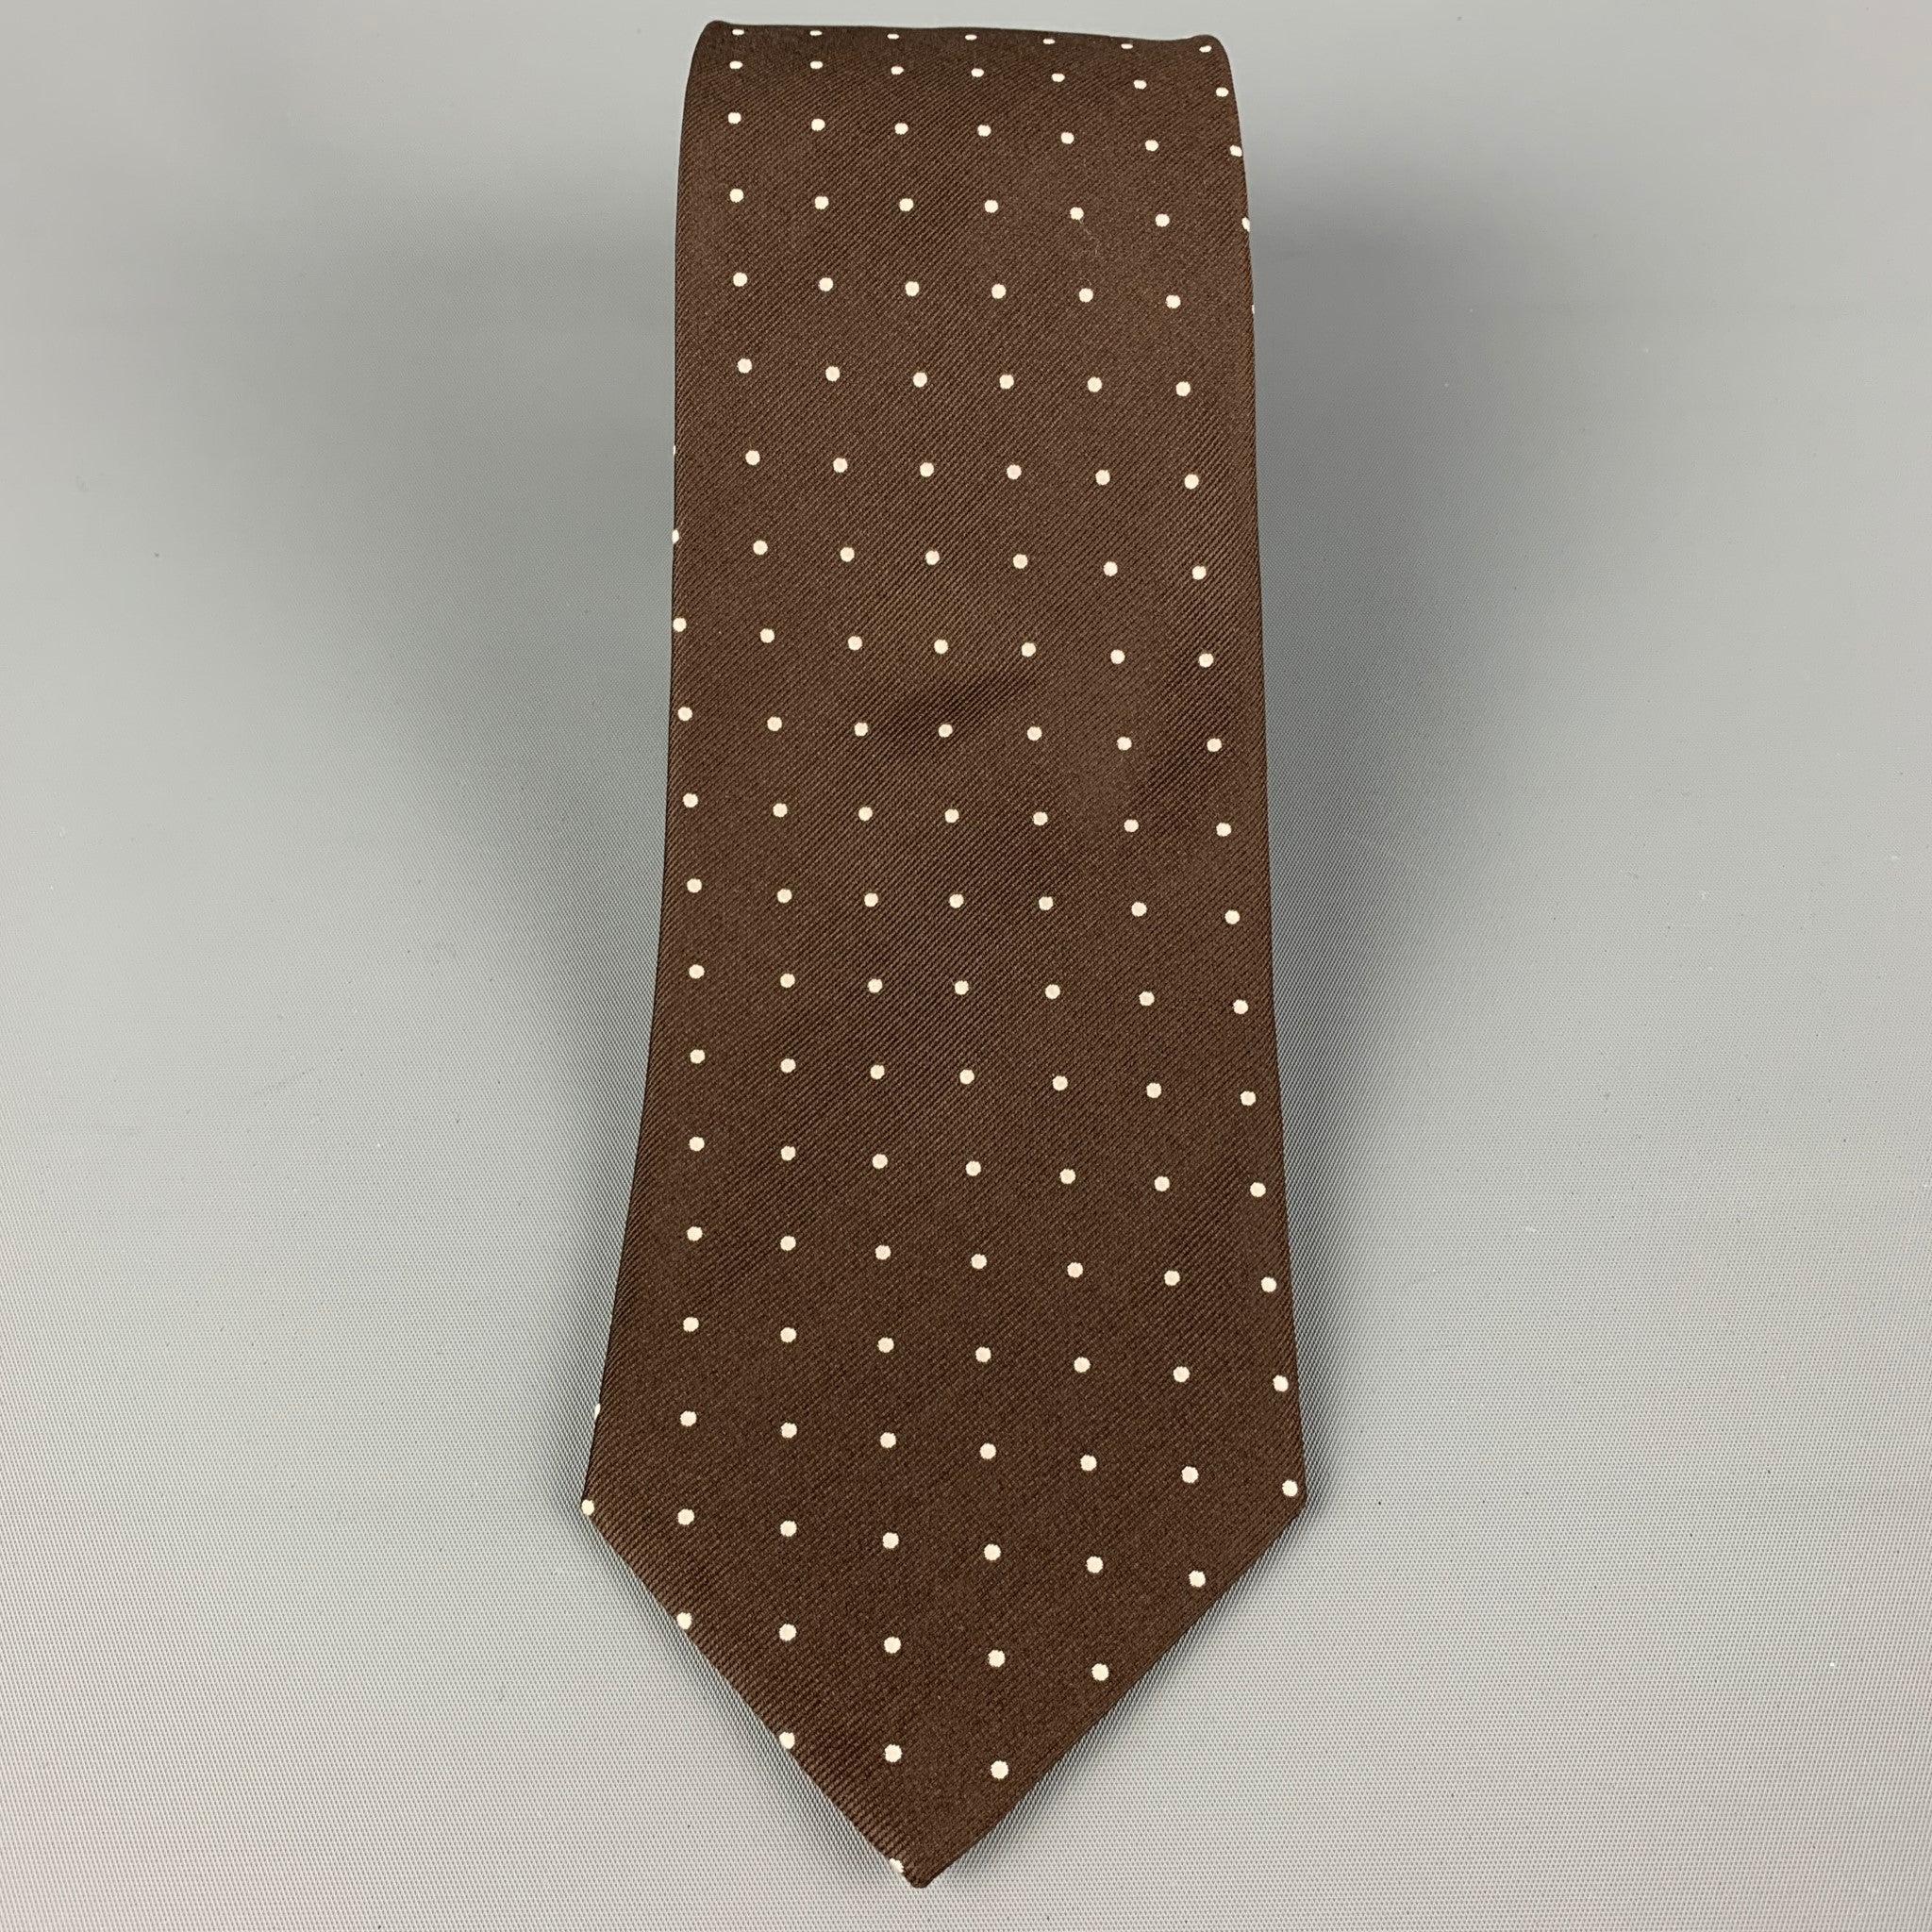 ERMENEGILDO ZEGNA for WILKES BASHFORD
necktie comes in a brown & white silk with a all over polka dot print. Made in Italy . Very Good Pre-Owned Condition.Width: 3.5 inches Length: 58 inches 
  
  
 
Reference: 120415
Category: Tie
More Details
   